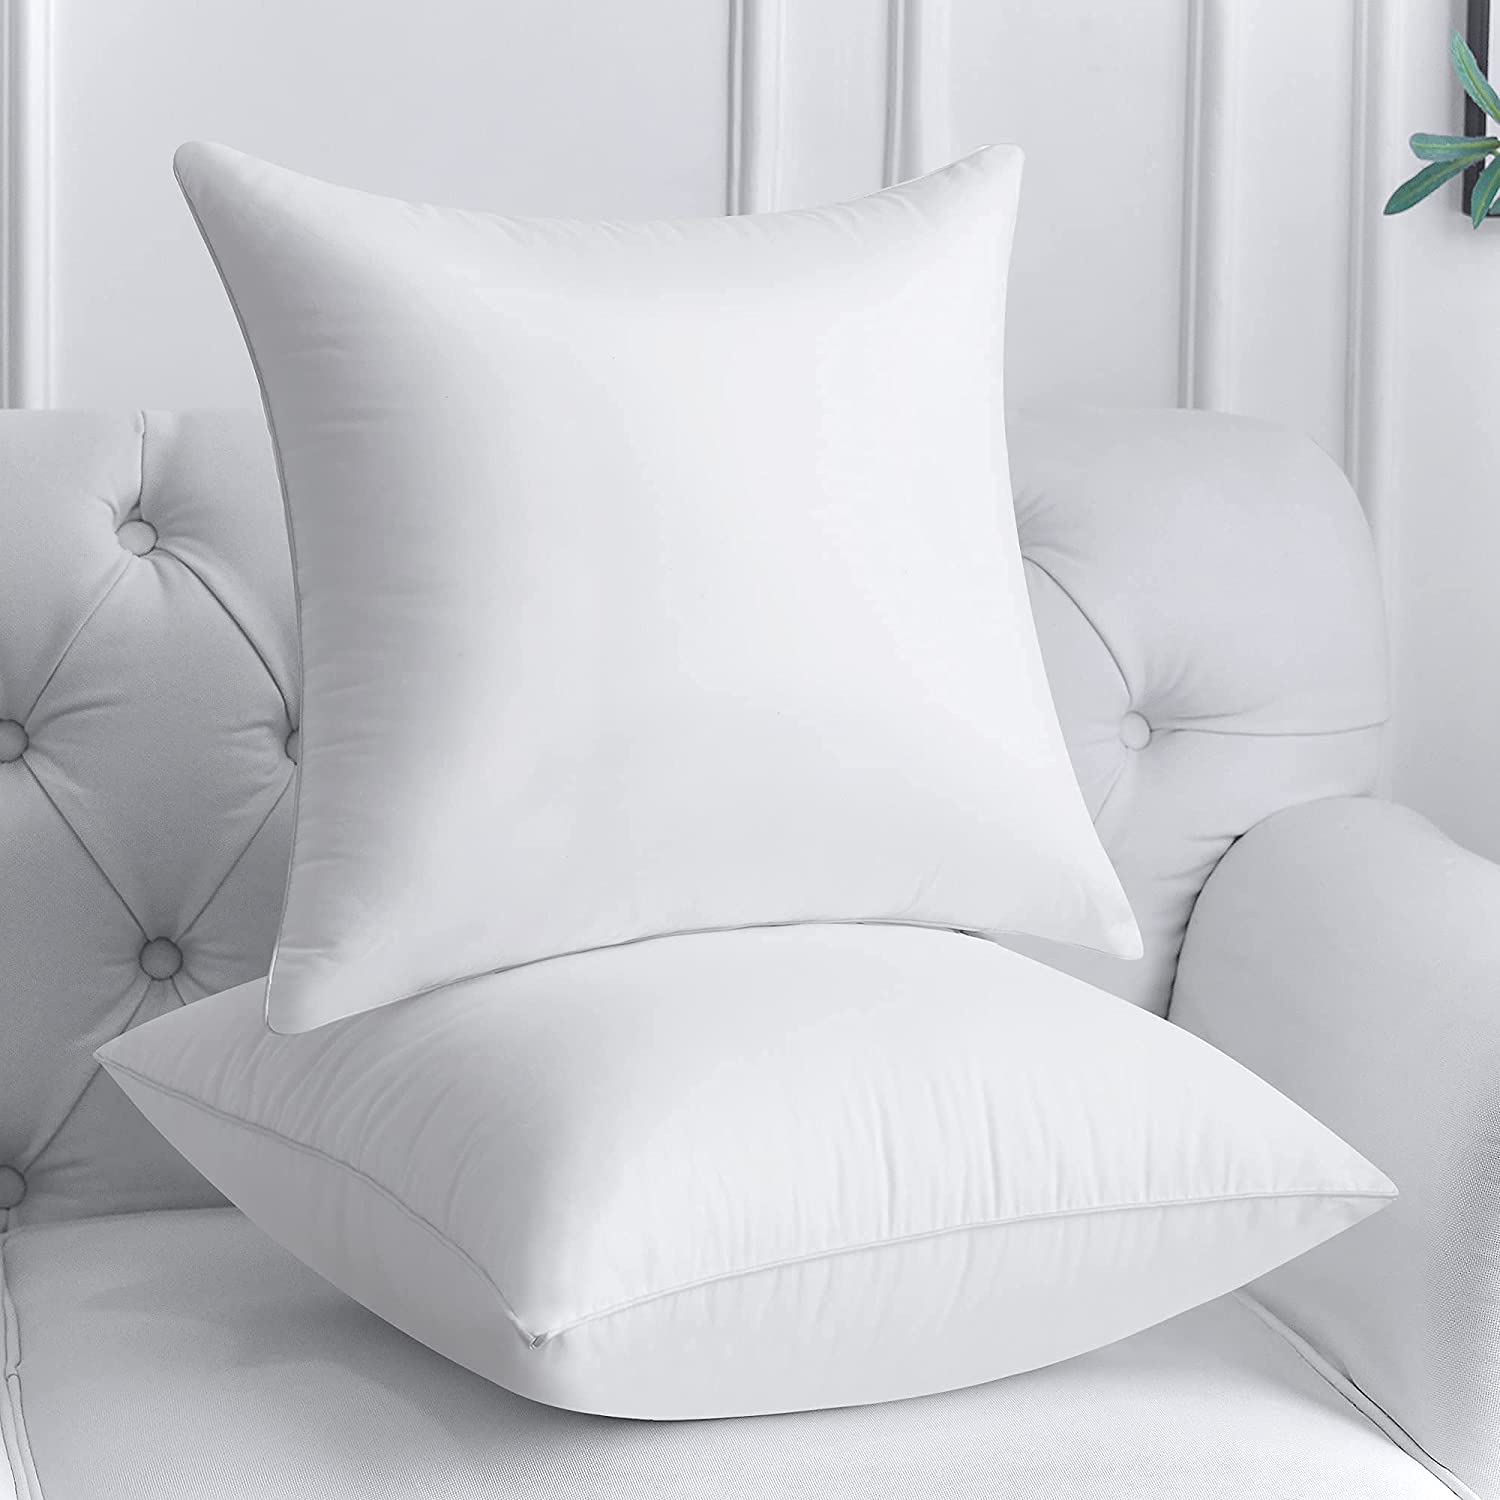 How to choose hotel bedding products?